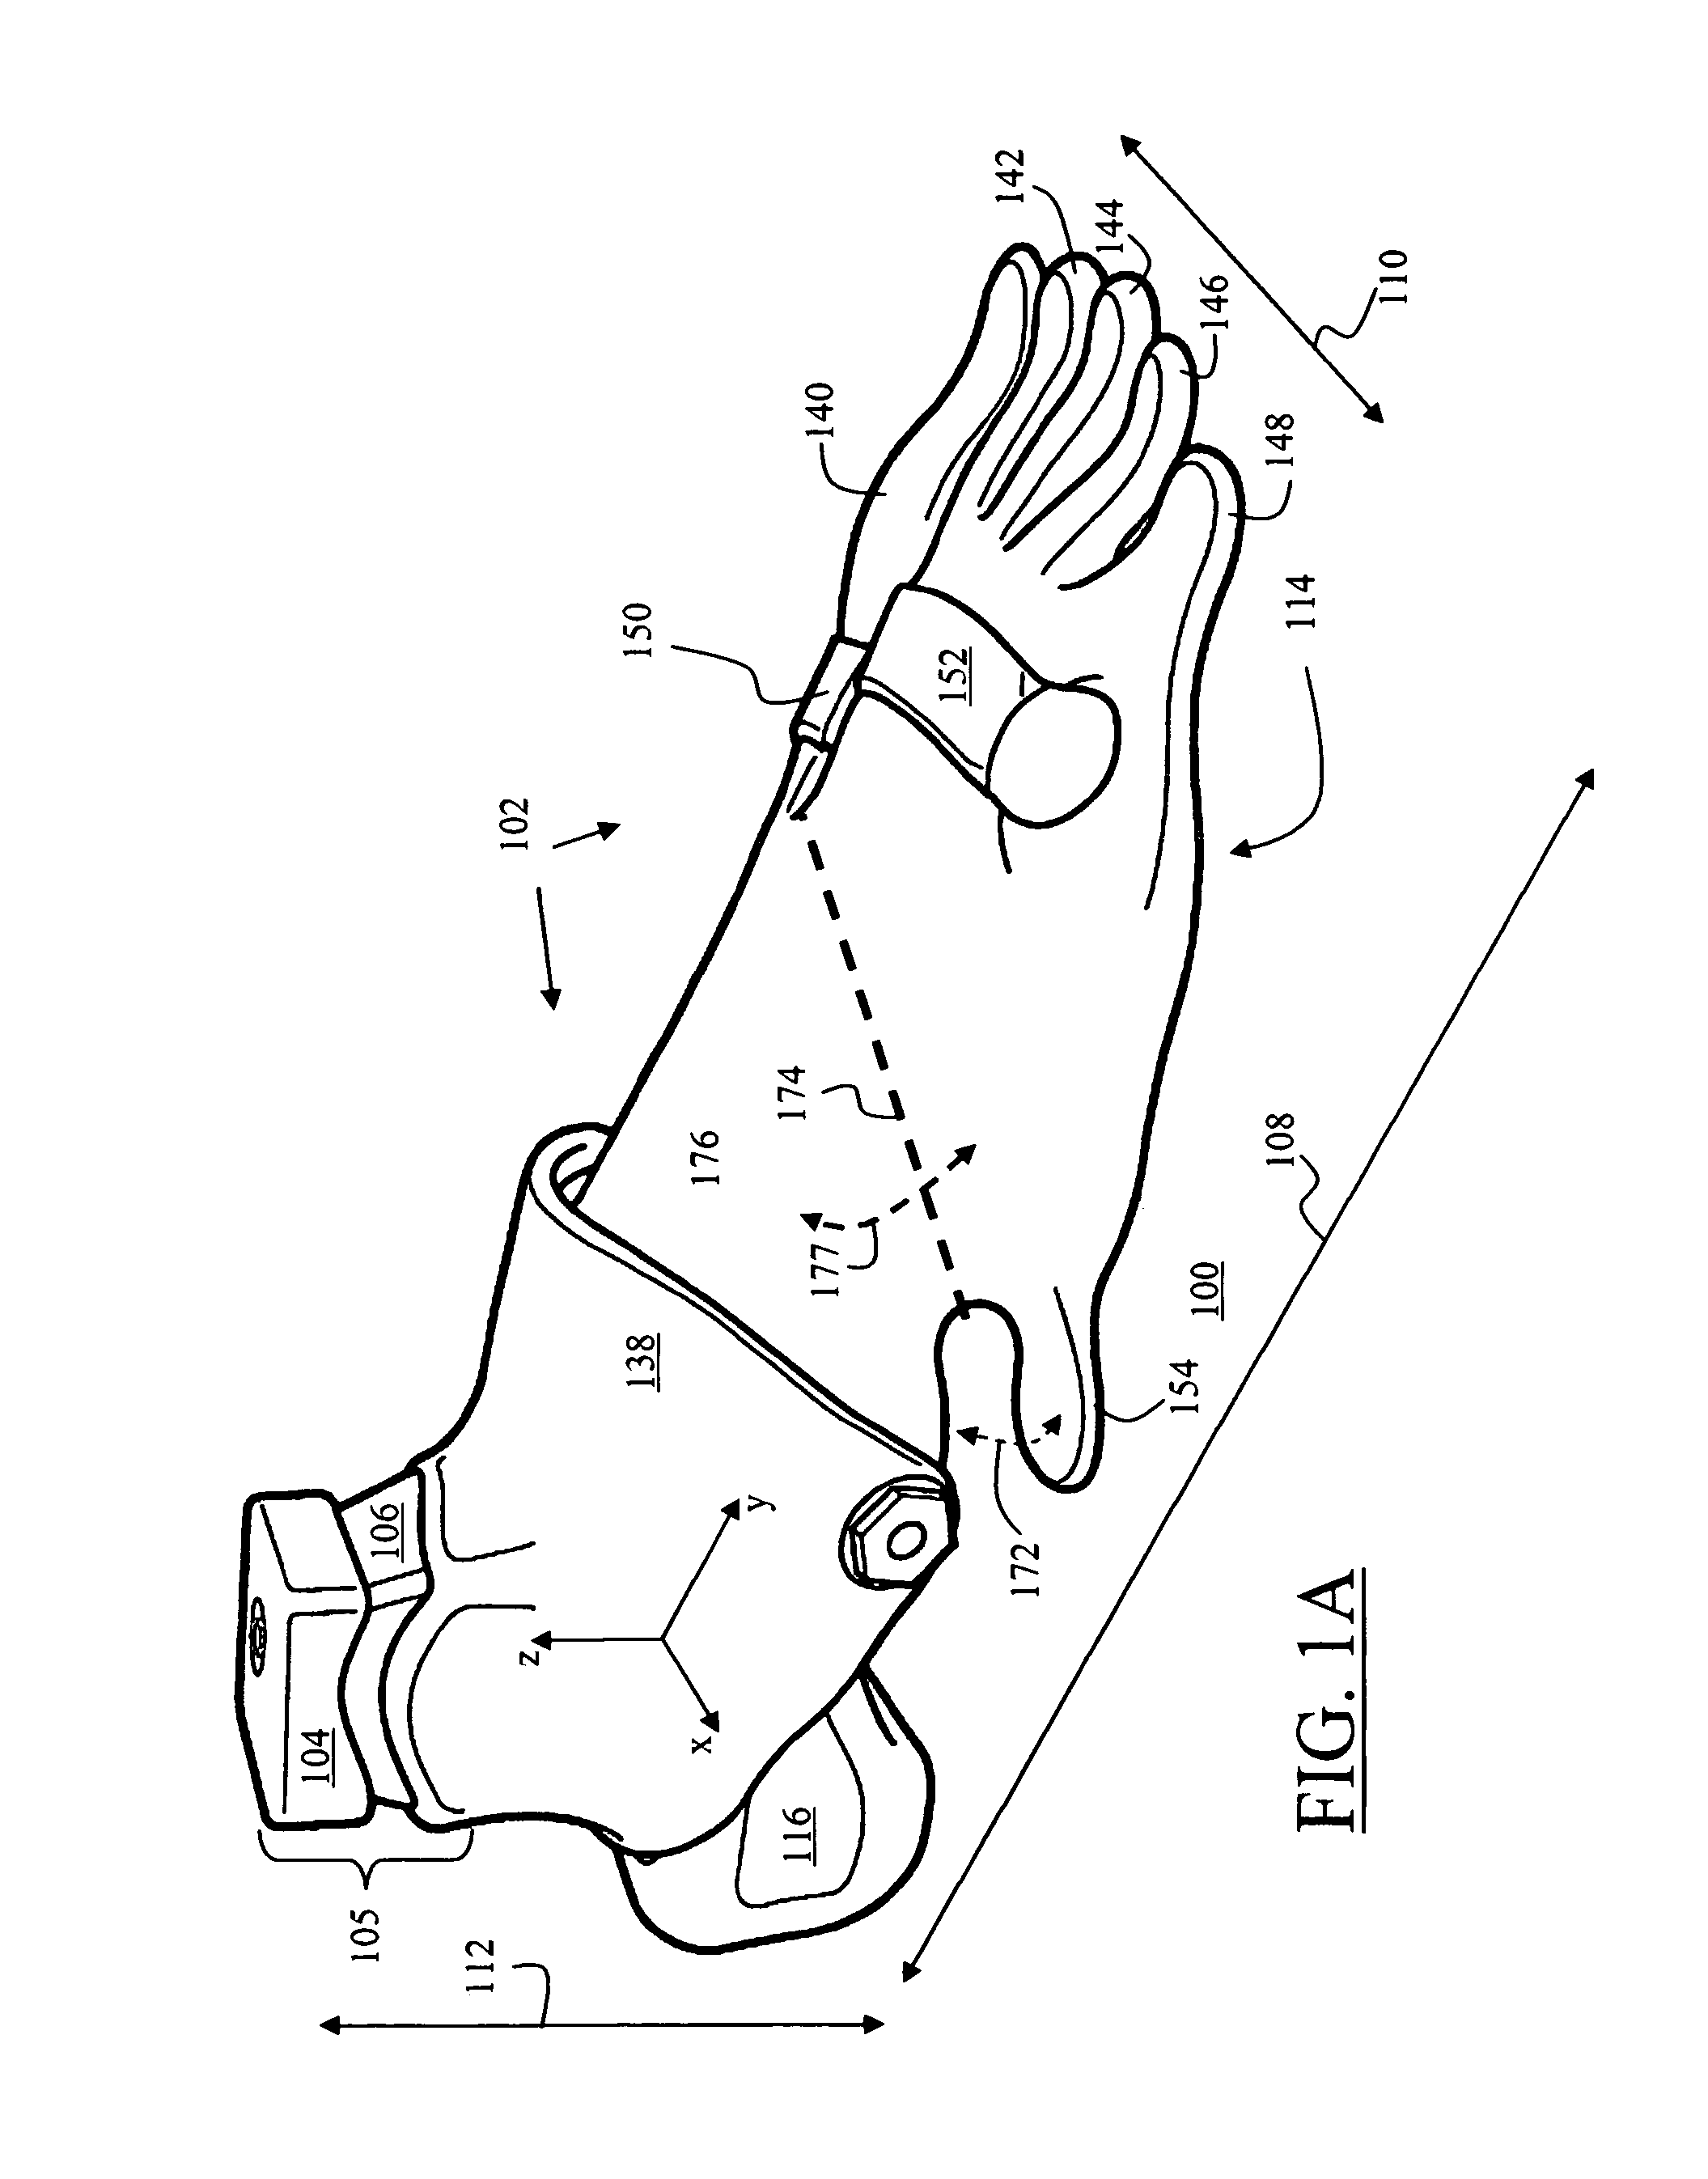 Prosthetic foot and ankle